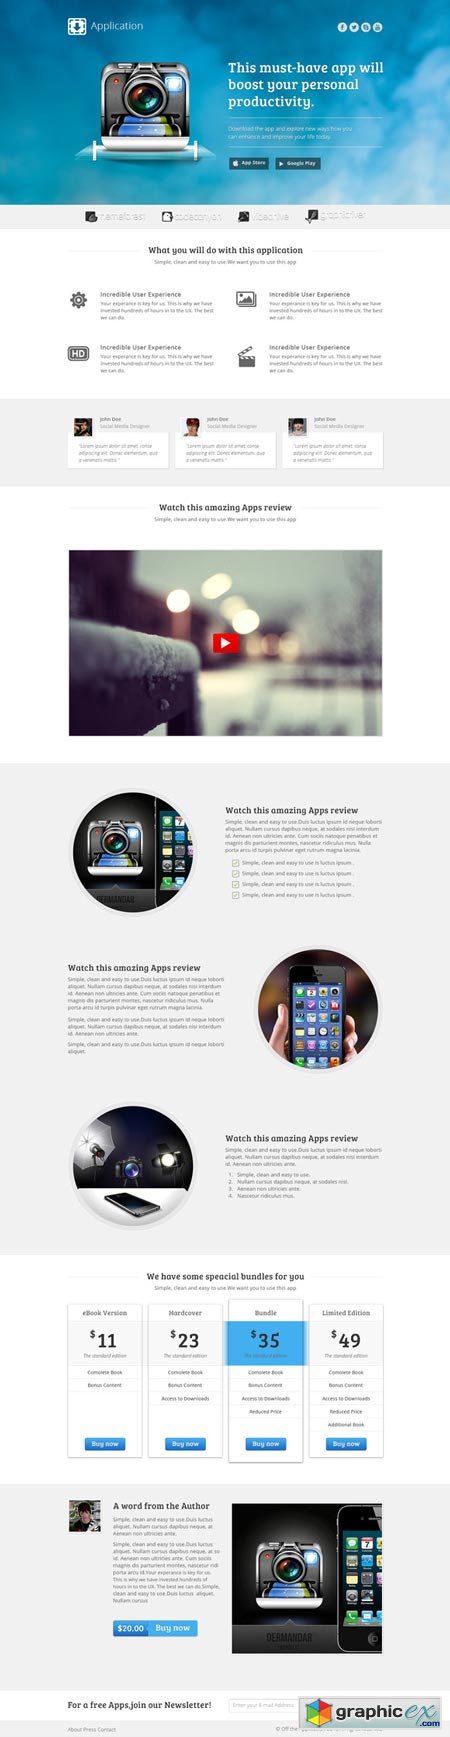 Creativemarket Application - Landing page for apps 4400